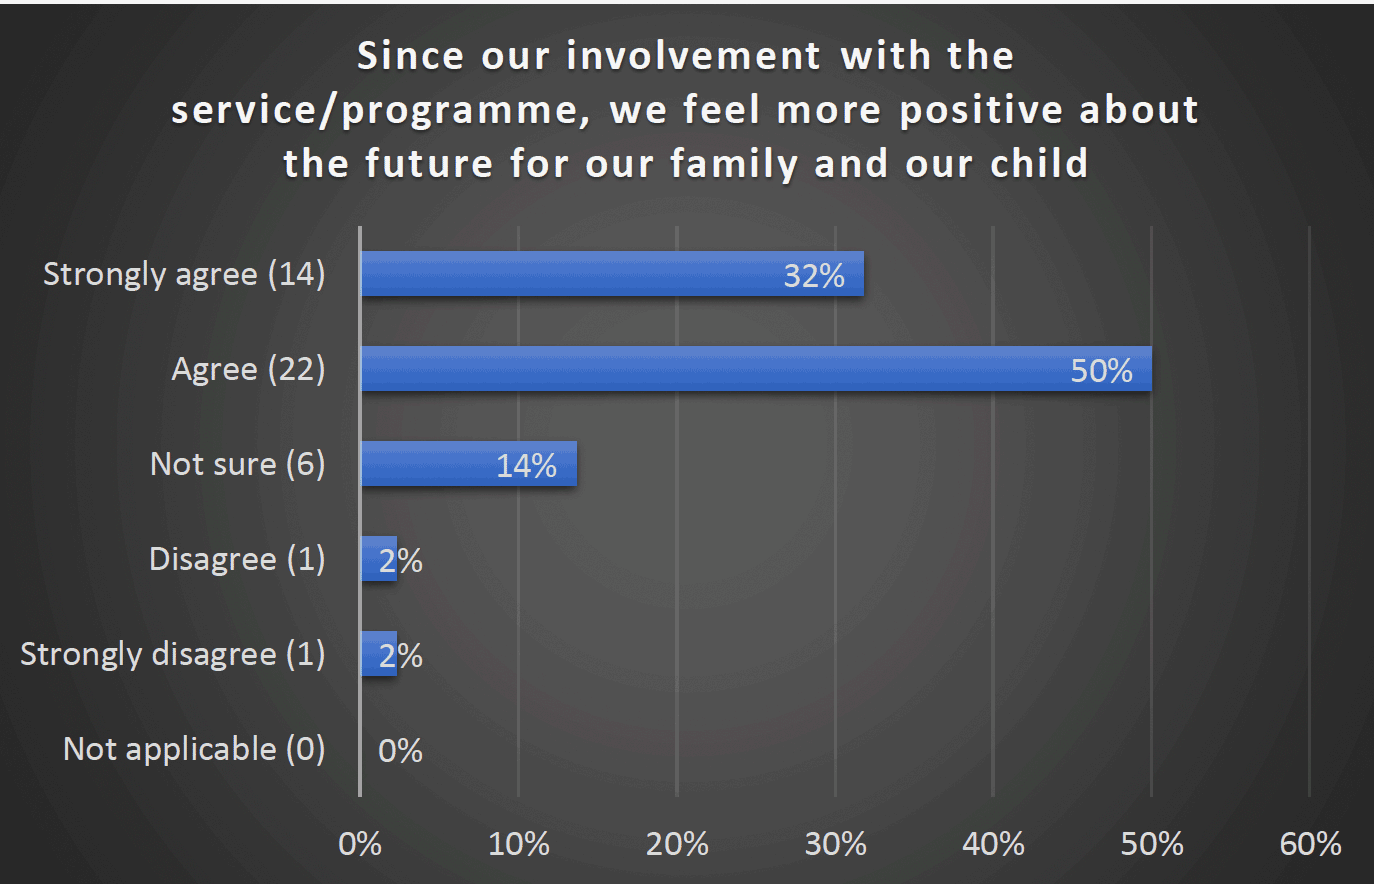 Since our involvement with the service/programme, we feel more positive about the future for our family and our child - Strongly agree (14) 32%, Agree (22) 50%, Agree (22) 14%, Disagree (1) 2%, Strongly disagree (1) 2%